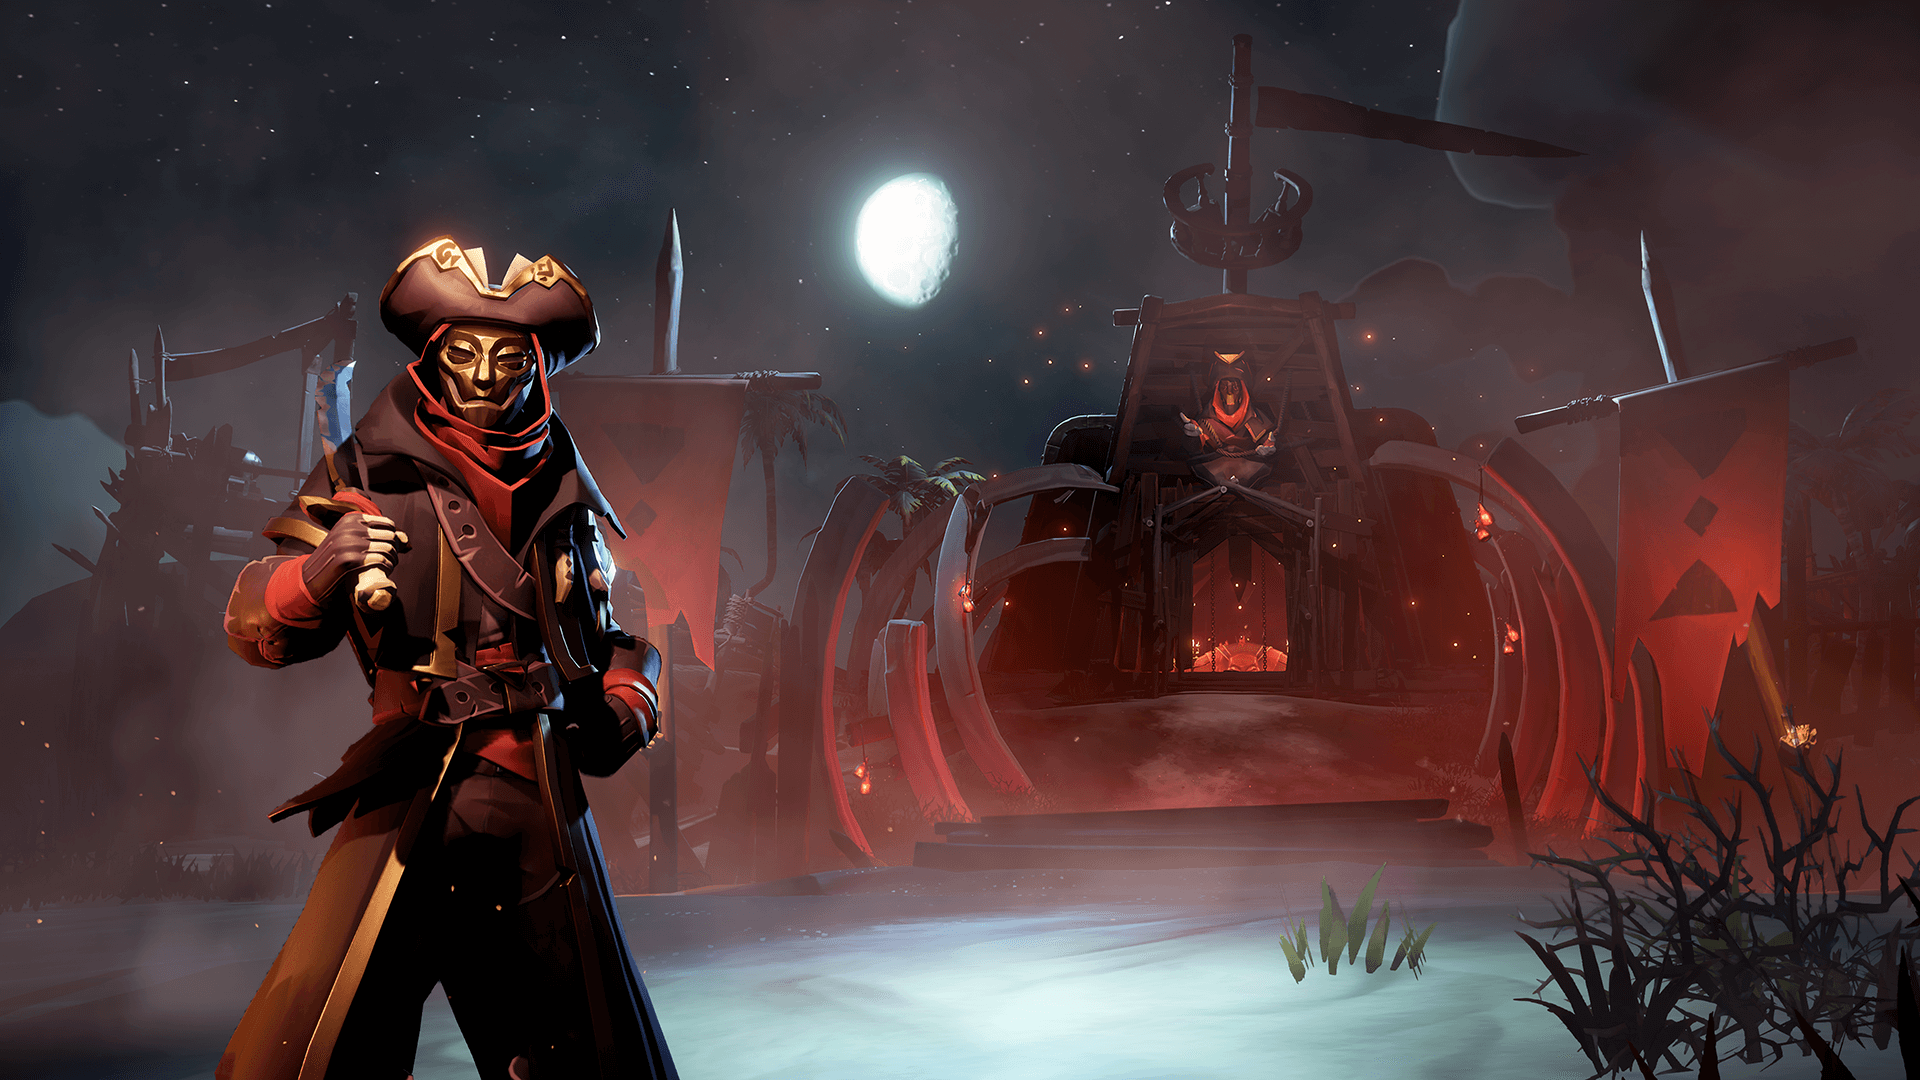 General 1920x1080 The Servant of the Flame (Sea of Thieves) night video games video game characters Moon Sea of Thieves video game art sky stars pirate hat gloves sword mask